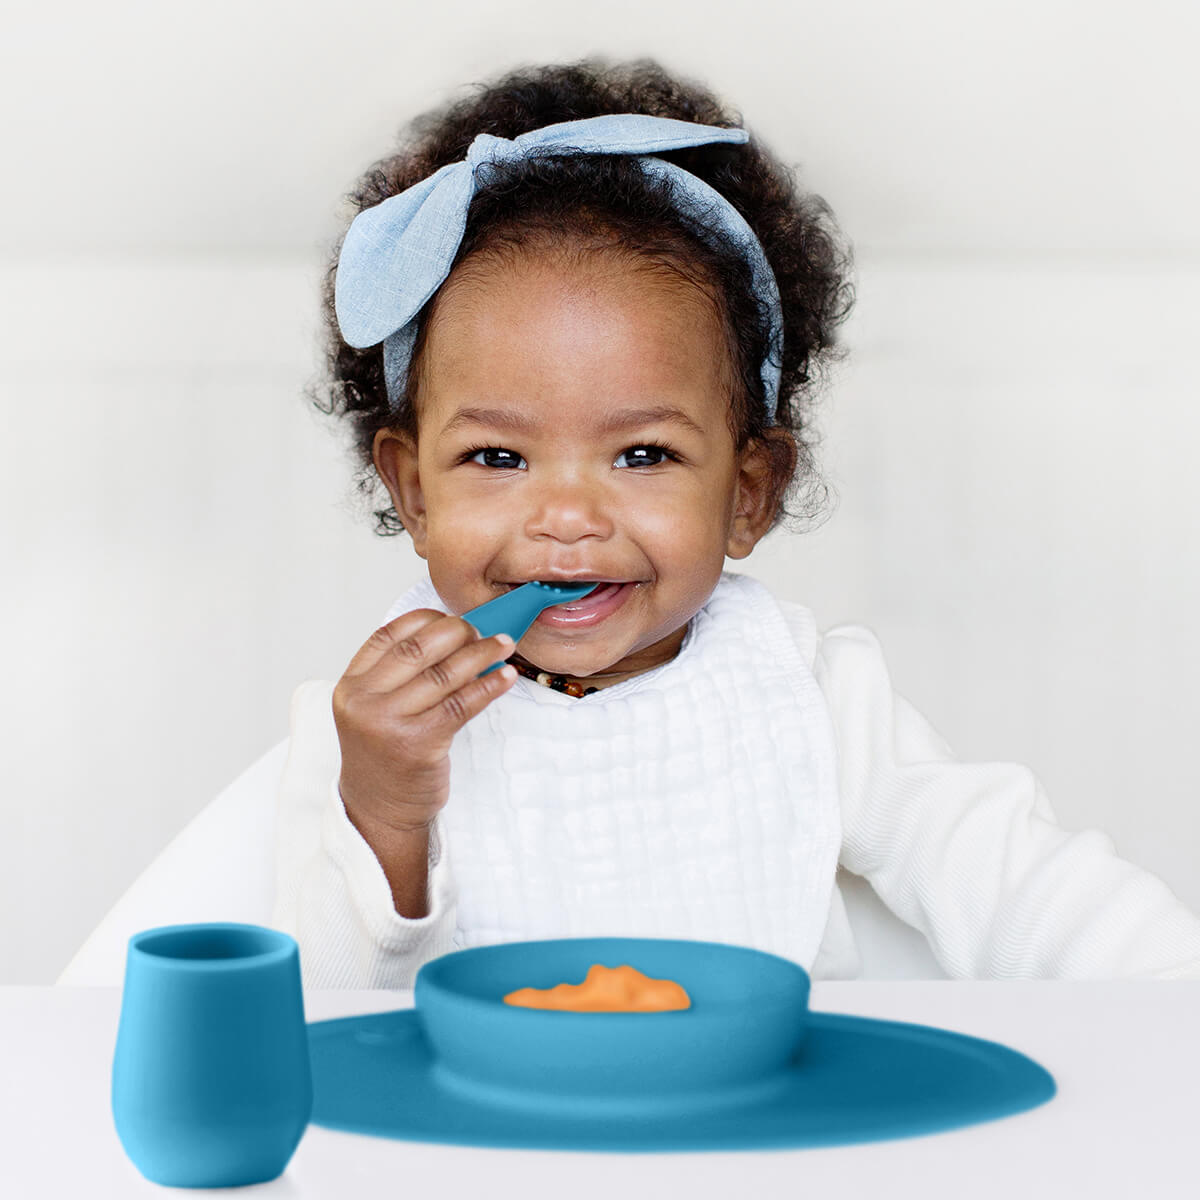 Baby Led Weaning First Food Set - Plate, Cup and Spoons by EzPz